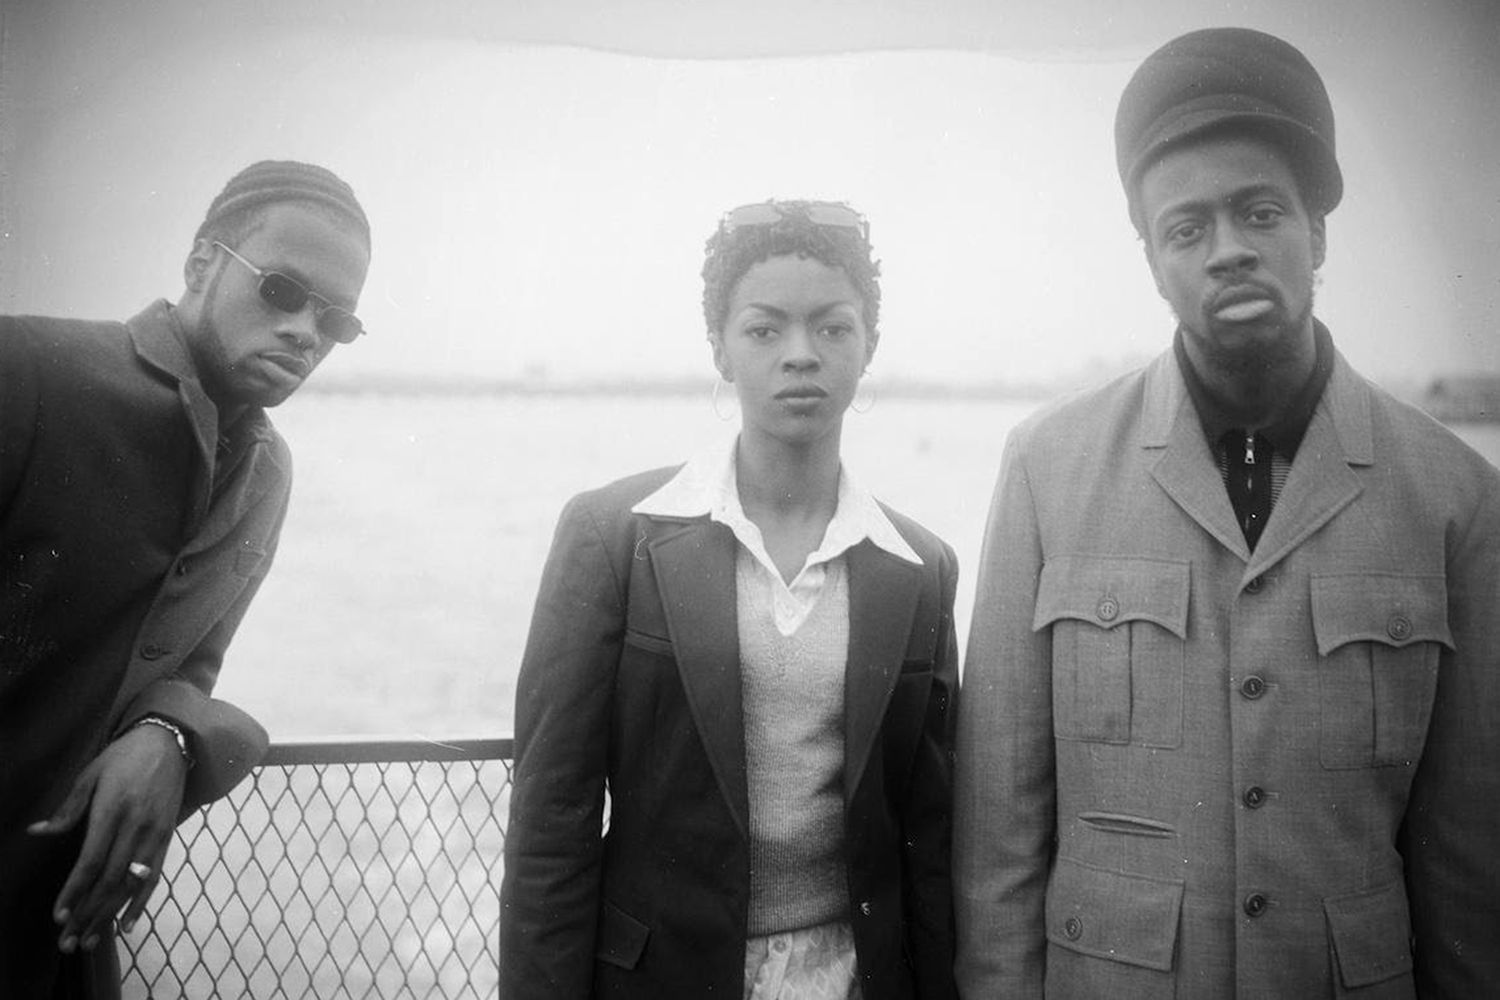 The Fugees